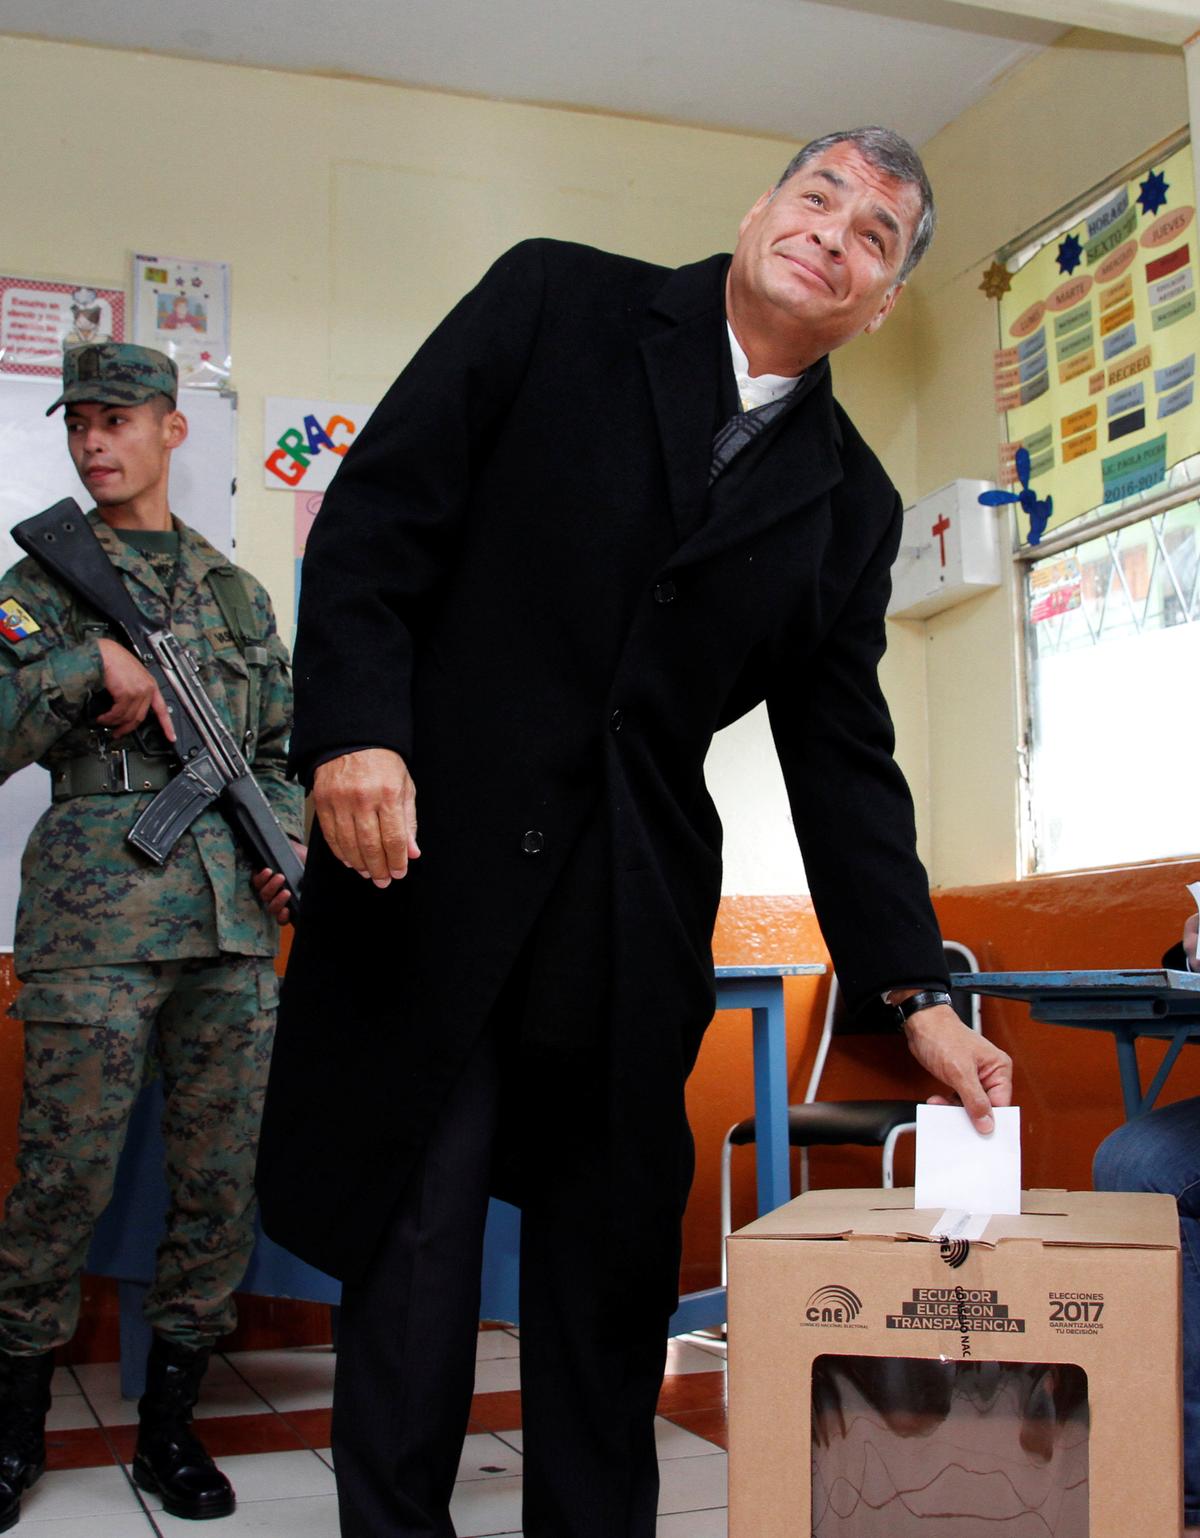 Ecuador's President Rafael Correa casts his vote at school used as a polling station during the presidential election, in Quito, Ecuador on April 2, 2017. (REUTERS/Carlos Noriega)